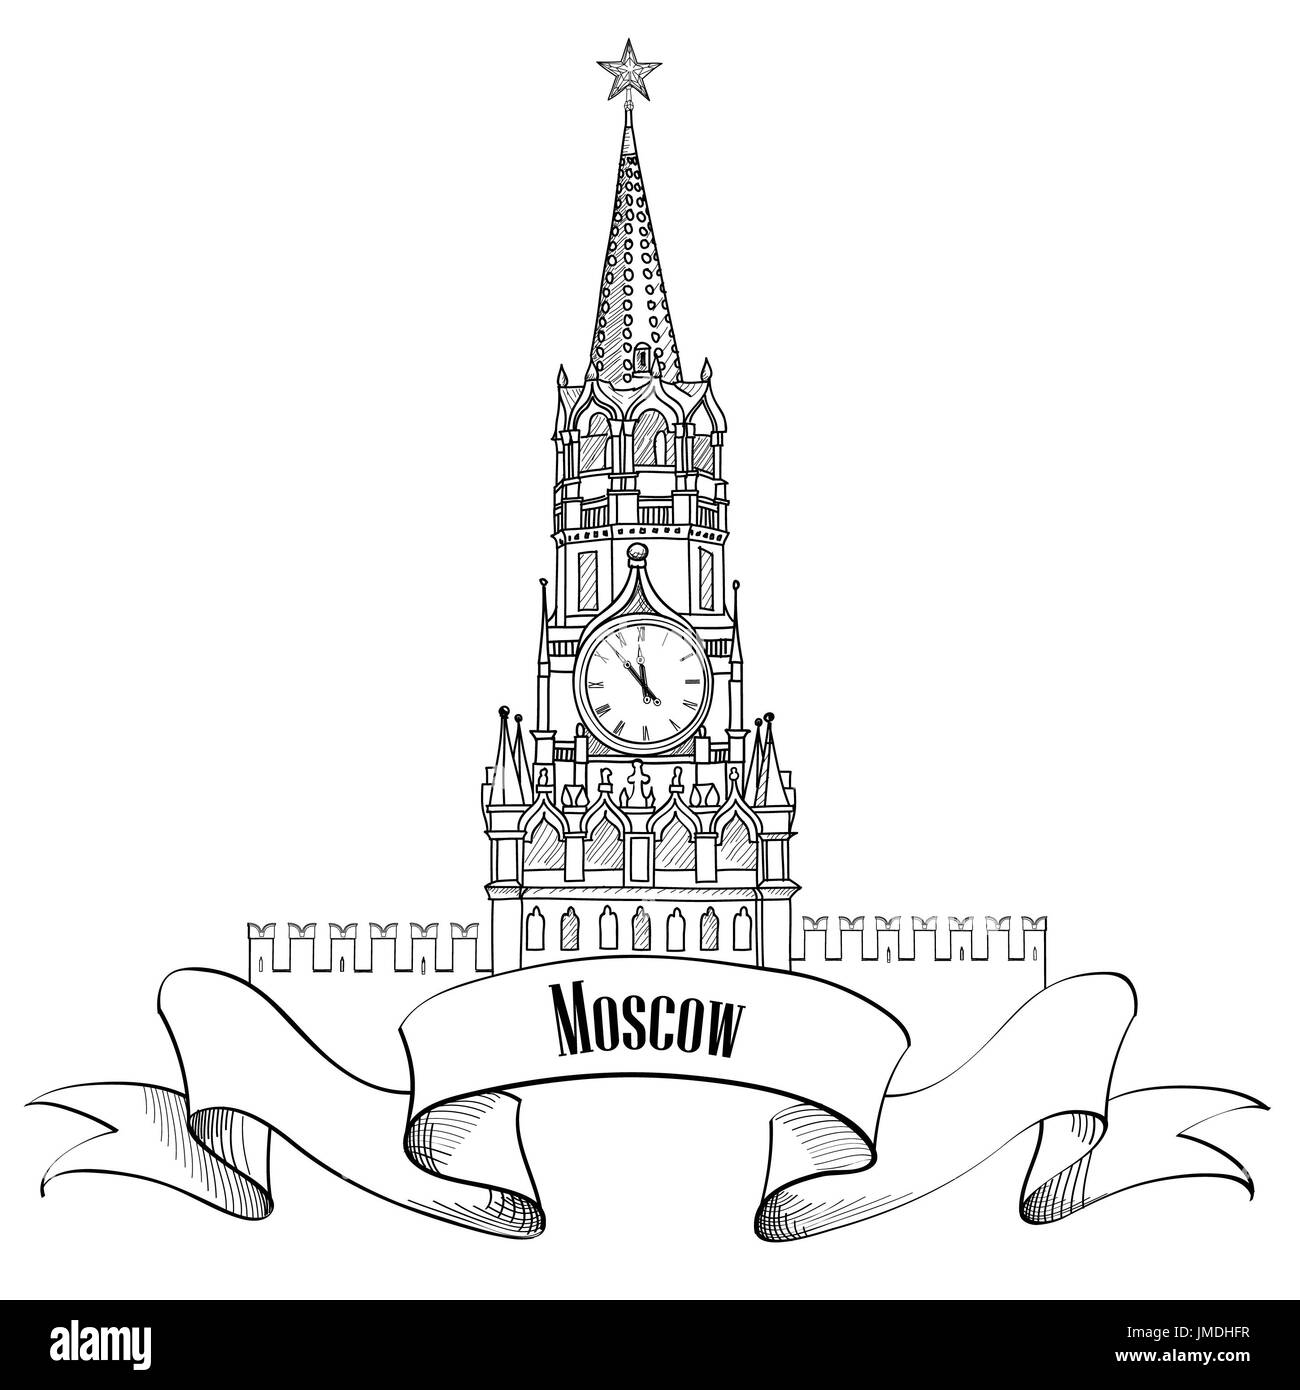 Spasskaya tower, Red Square, Kremlin, Moscow, Russia. Moscow City Label. Travel icon vector hand drawn illustration. Stock Photo